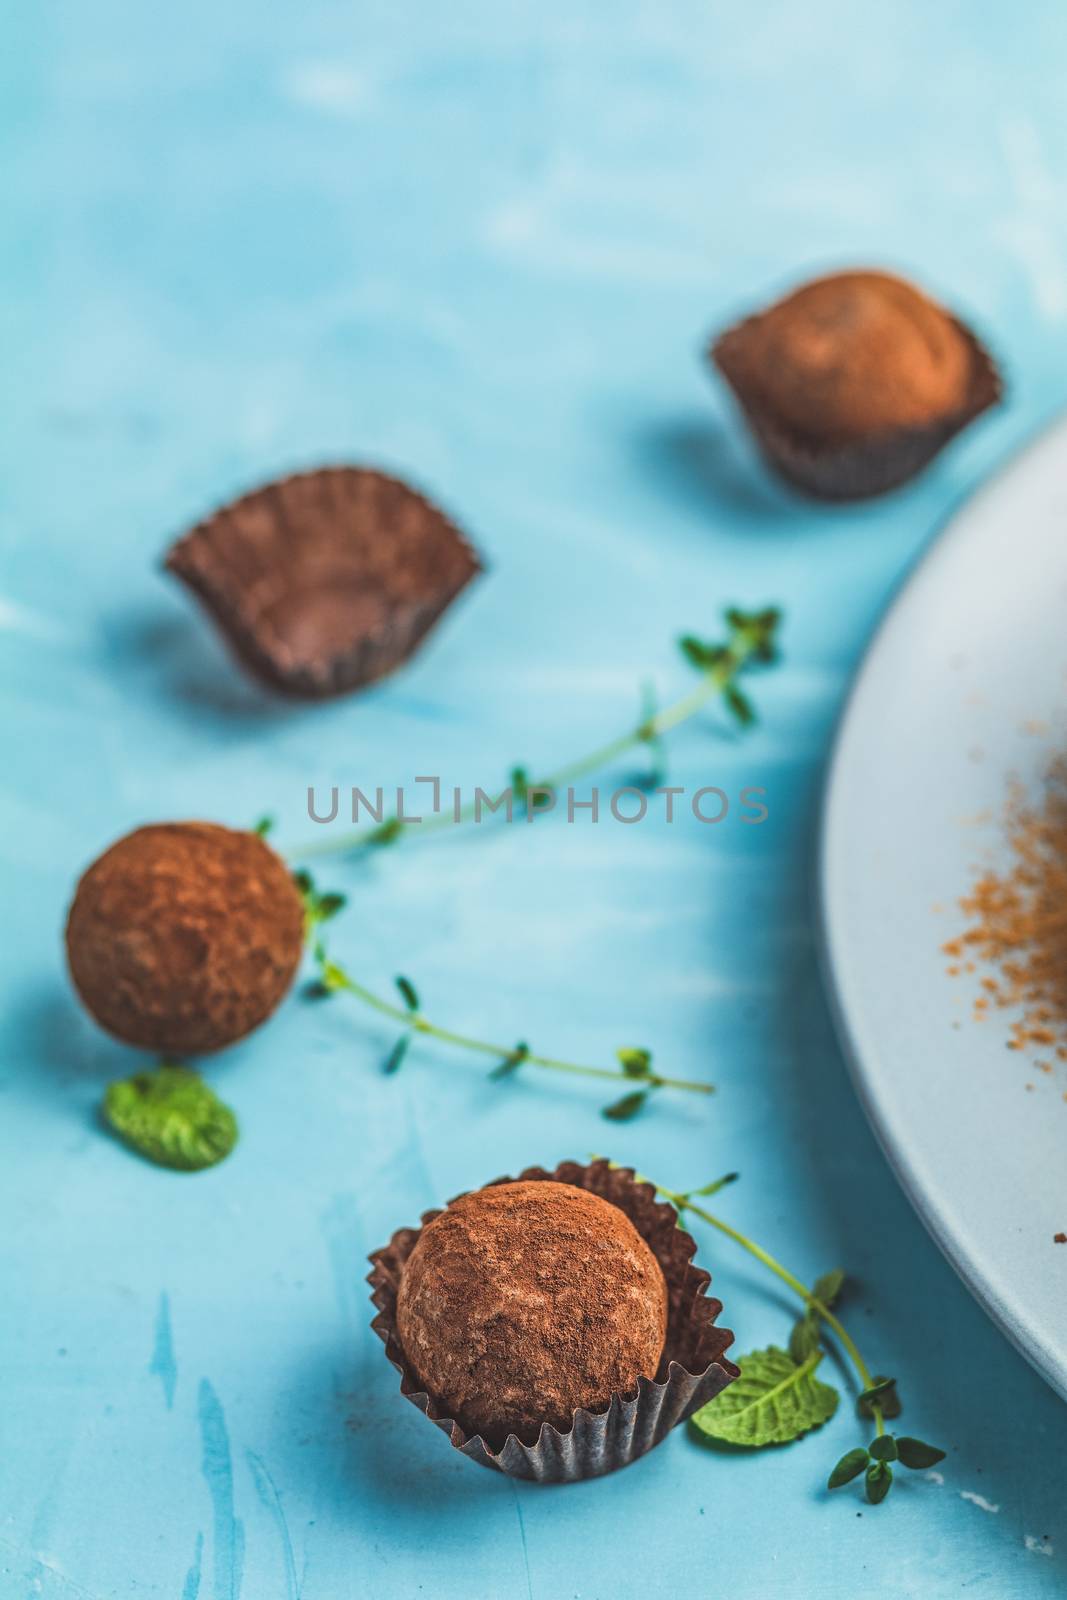 Cocoa balls, handmade chocolate balls cakes in a blue tray by ArtSvitlyna